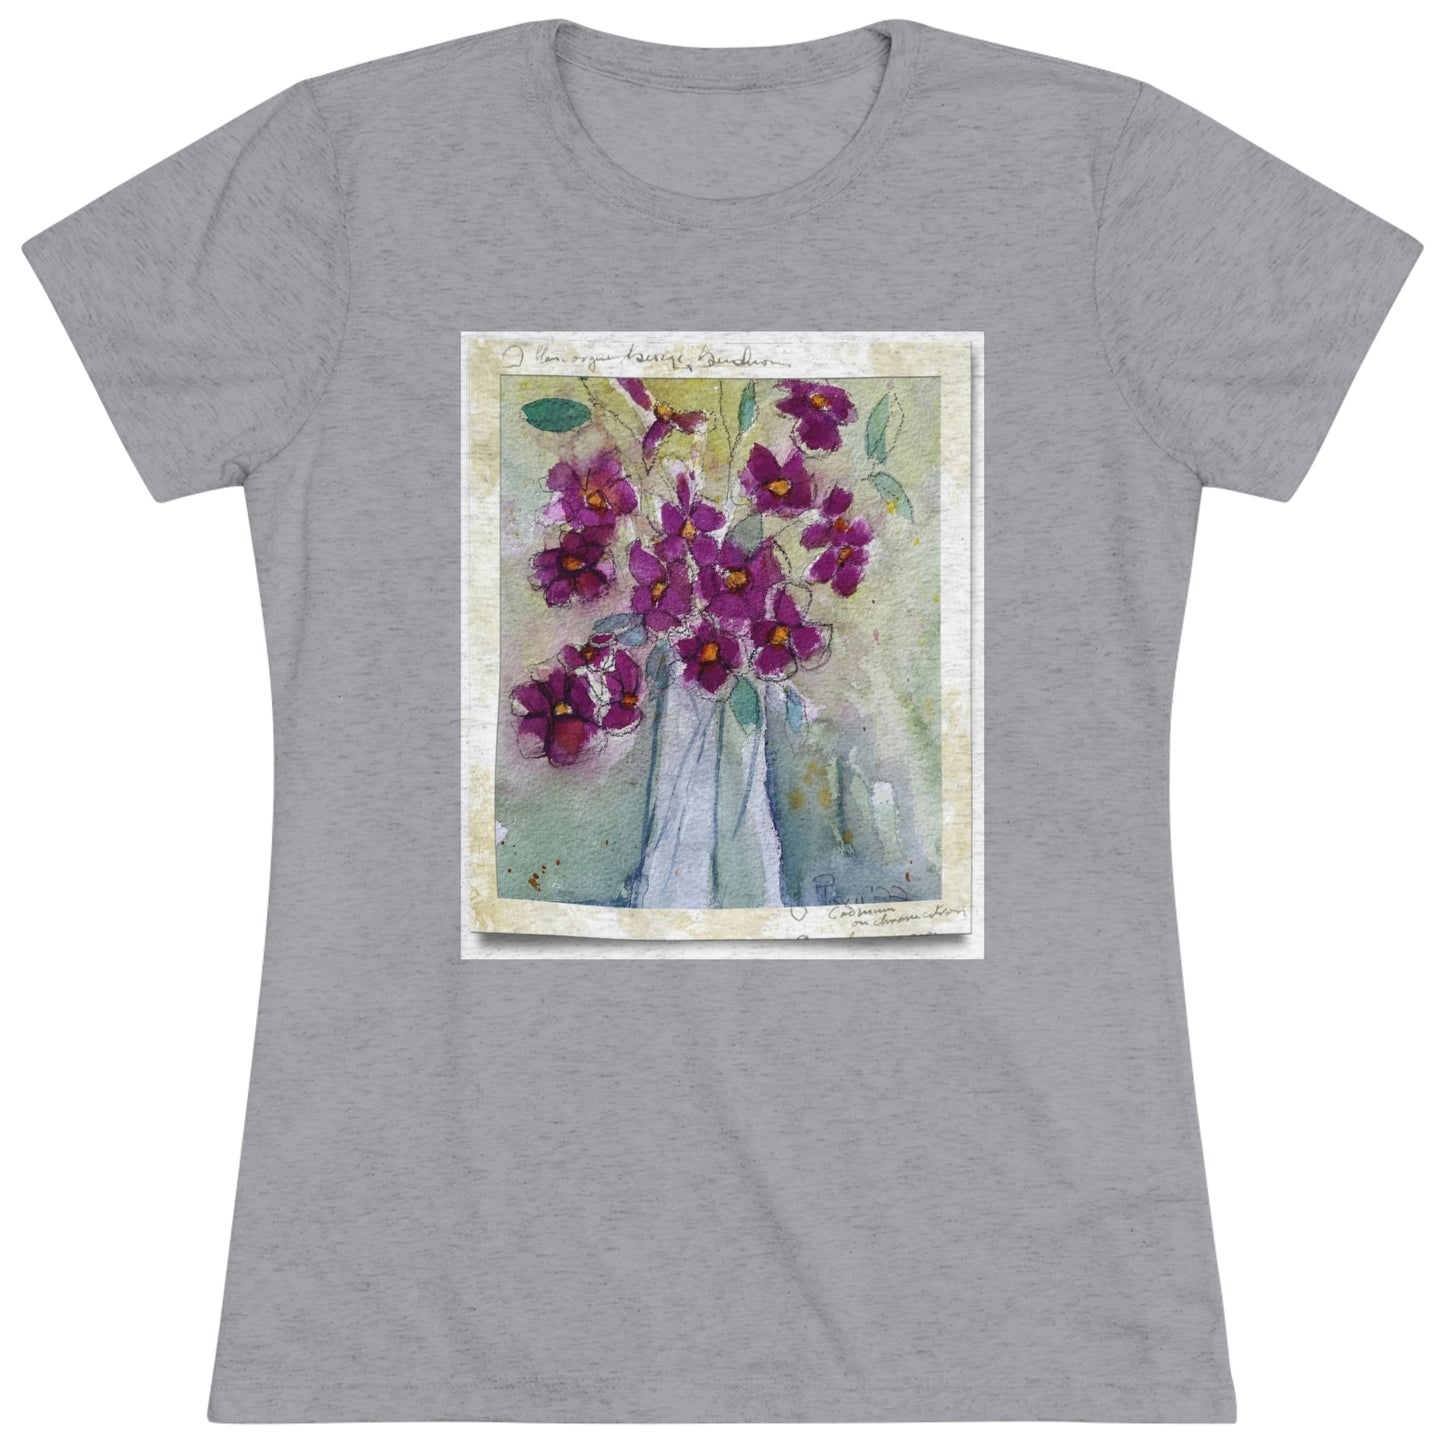 Pink Wildflowers Women's fitted Triblend Tee  tee shirt